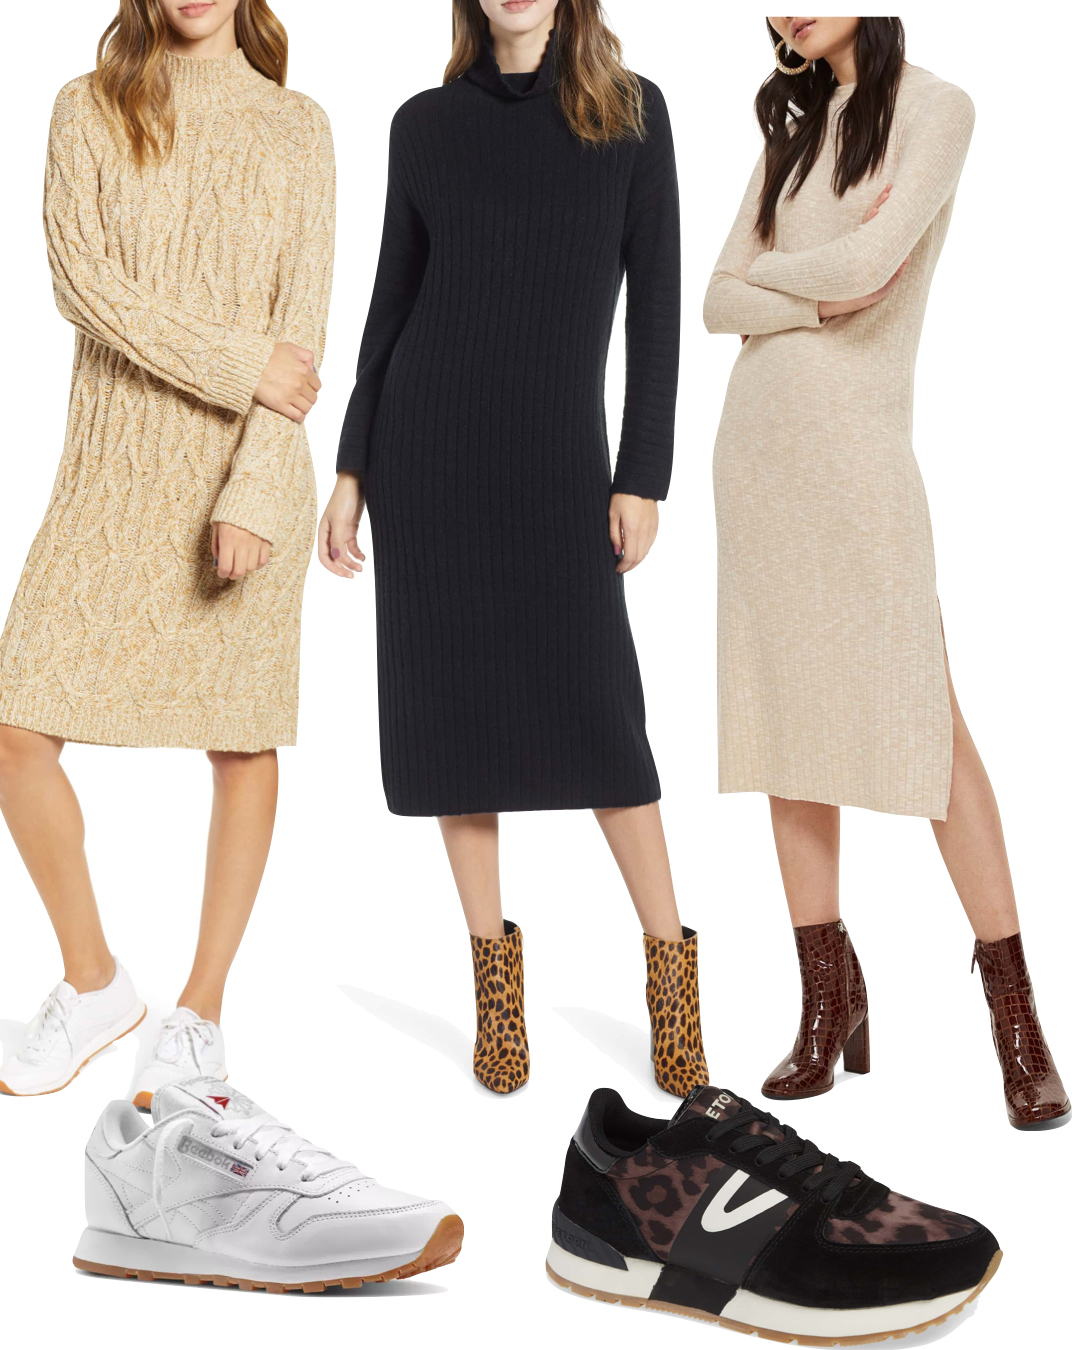 Sweater Dress Outfit Ideas + Favorite 